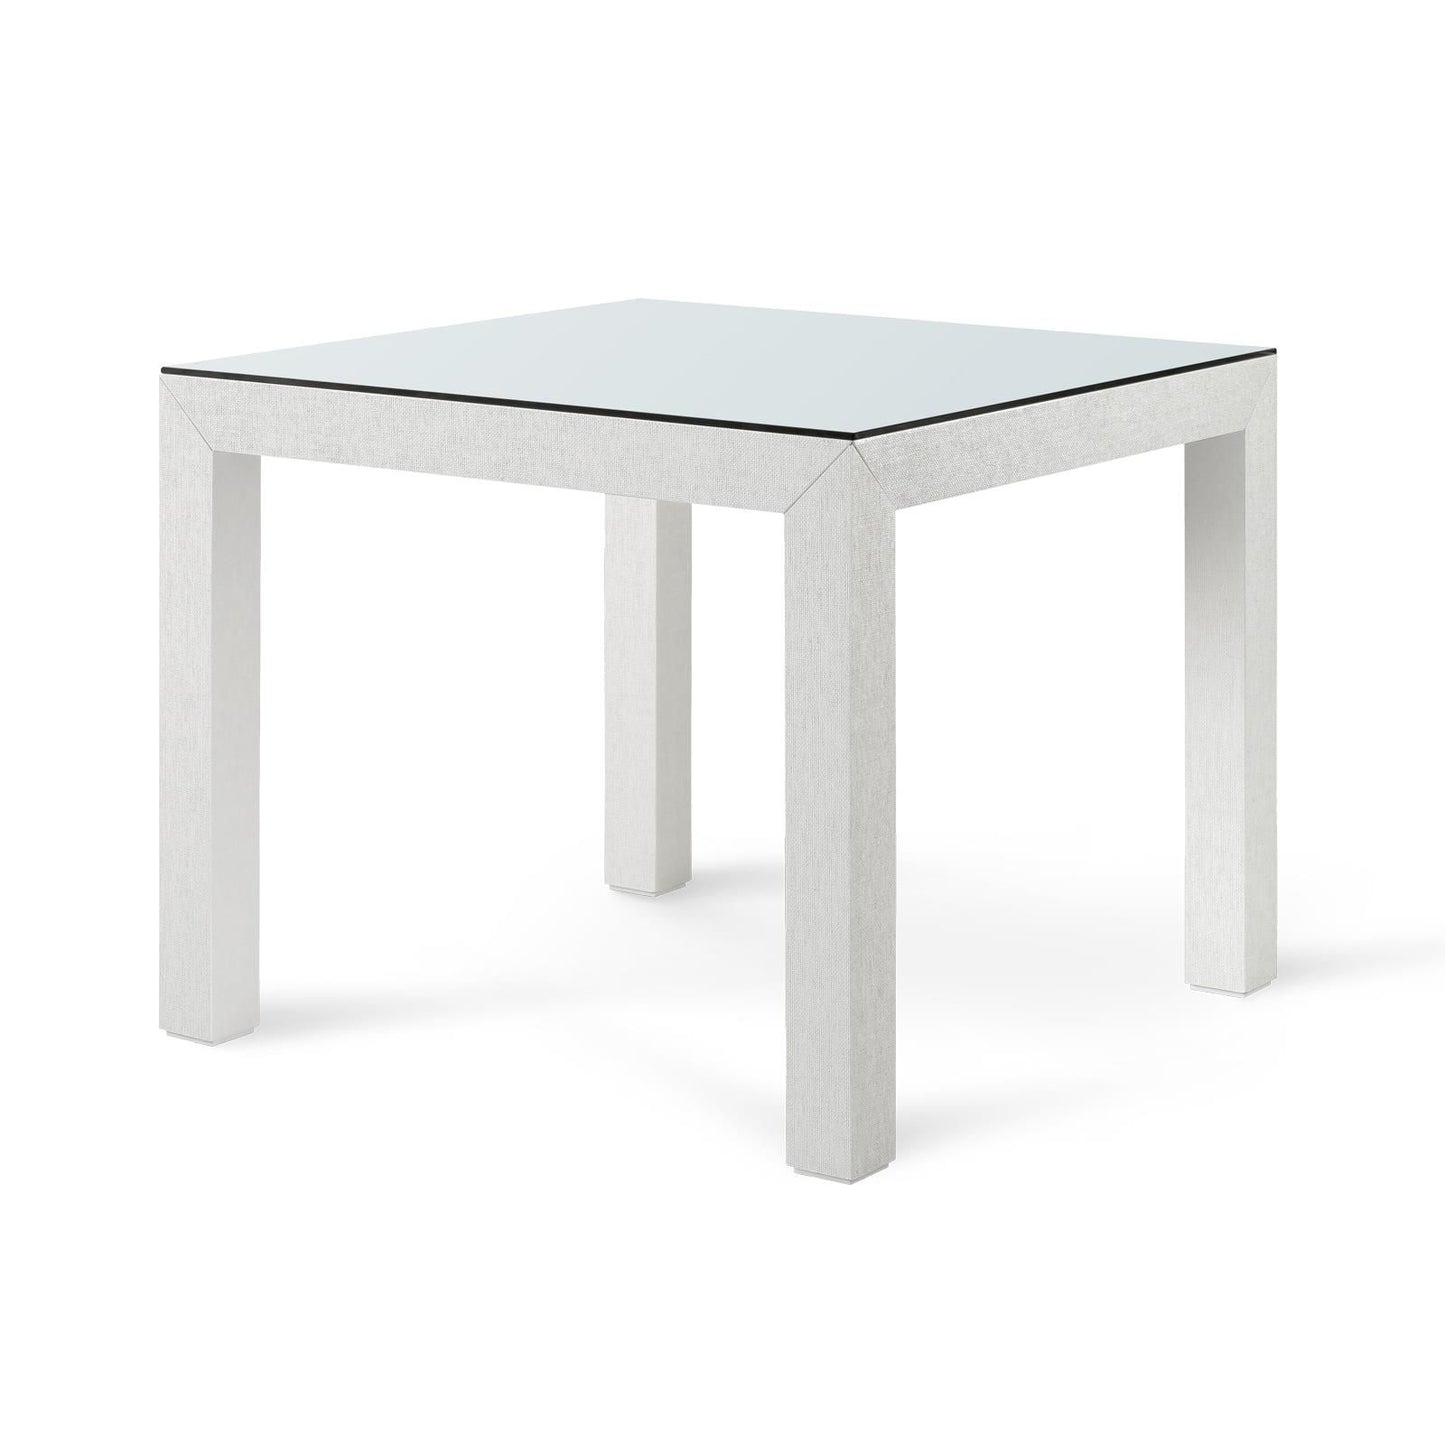 Load image into Gallery viewer, Valentina Game Table WhiteTable Bungalow 5  White   Four Hands, Burke Decor, Mid Century Modern Furniture, Old Bones Furniture Company, Old Bones Co, Modern Mid Century, Designer Furniture, https://www.oldbonesco.com/
